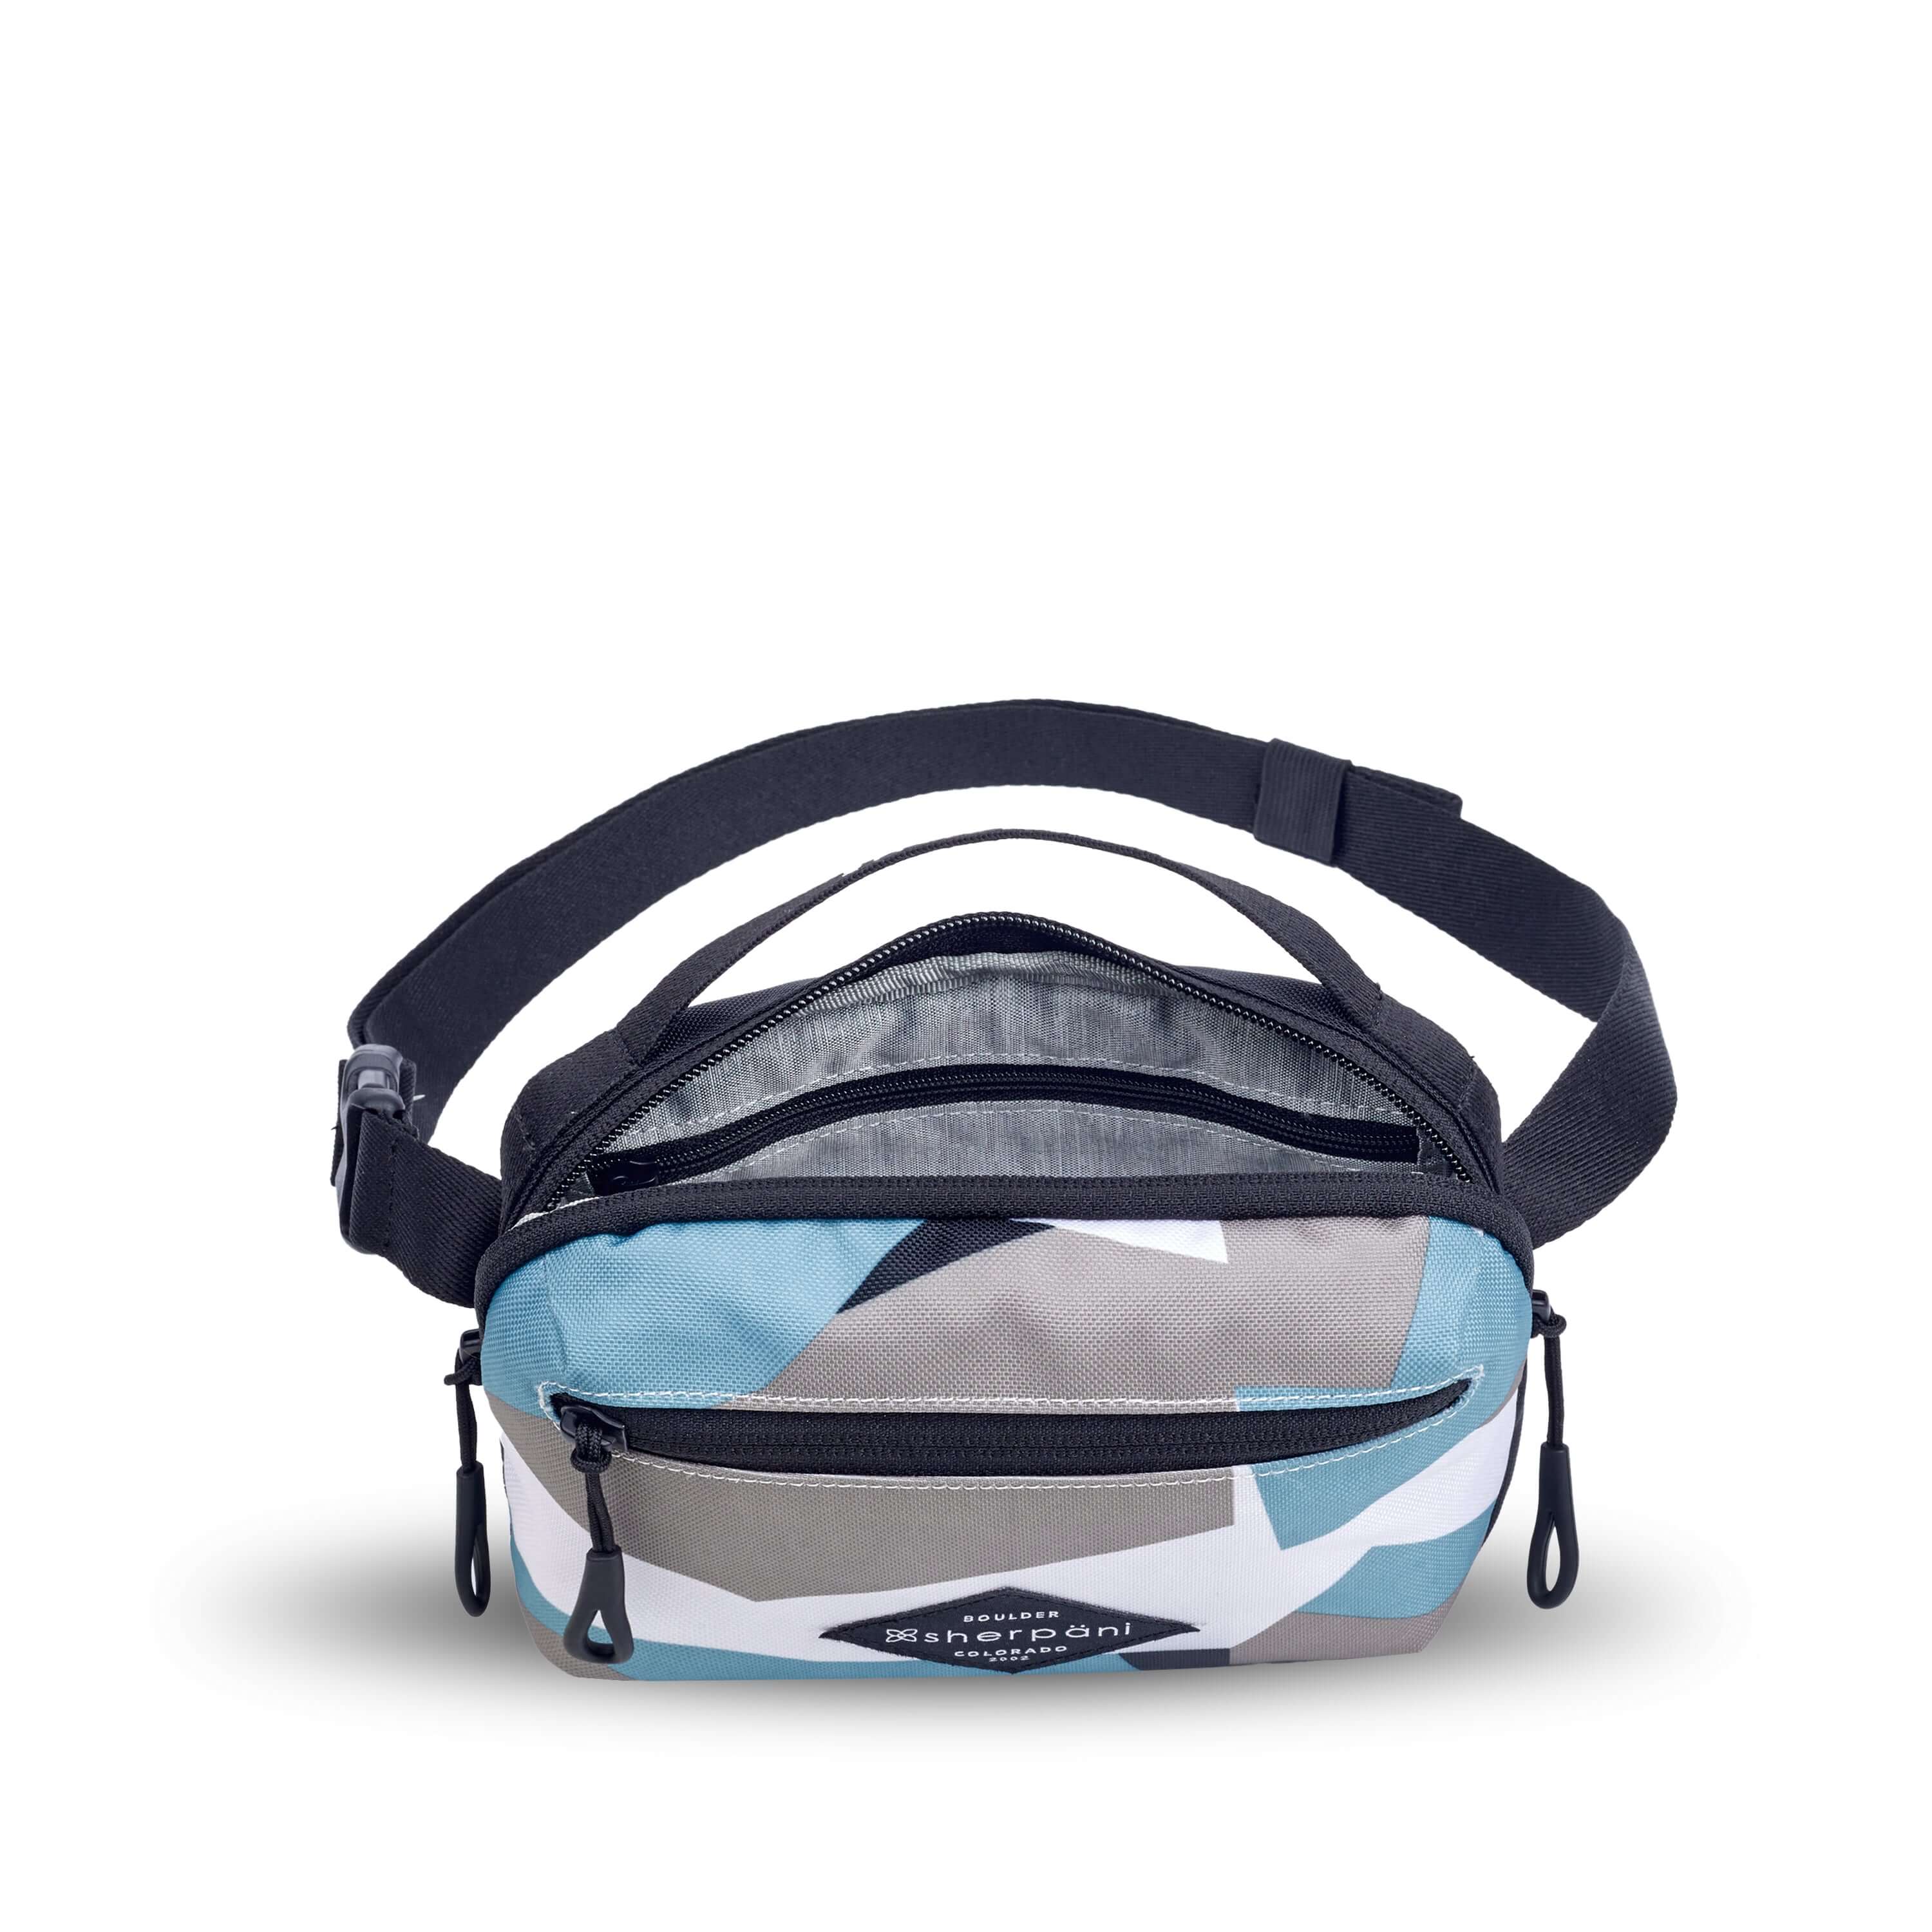 Top view of Sherpani's fanny pack, the Hyk in Summer Camo. The main zipper compartment is open to reveal a light gray interior and an internal zipper pocket. 